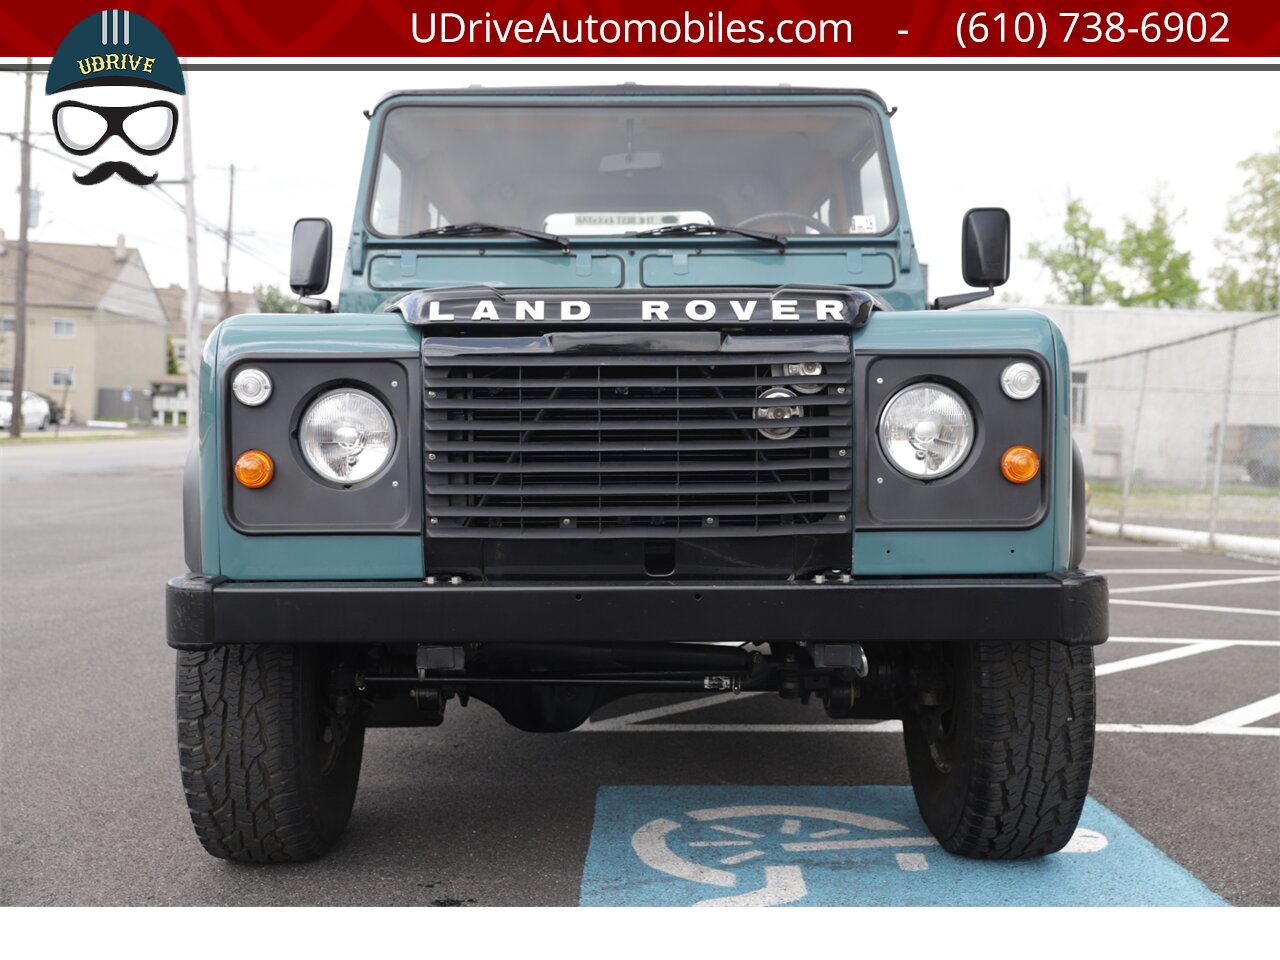 1986 Land Rover Defender 90 D90 4.0L V8 5 Speed Manual New Interior  $25k Recent Engine Build - Photo 13 - West Chester, PA 19382